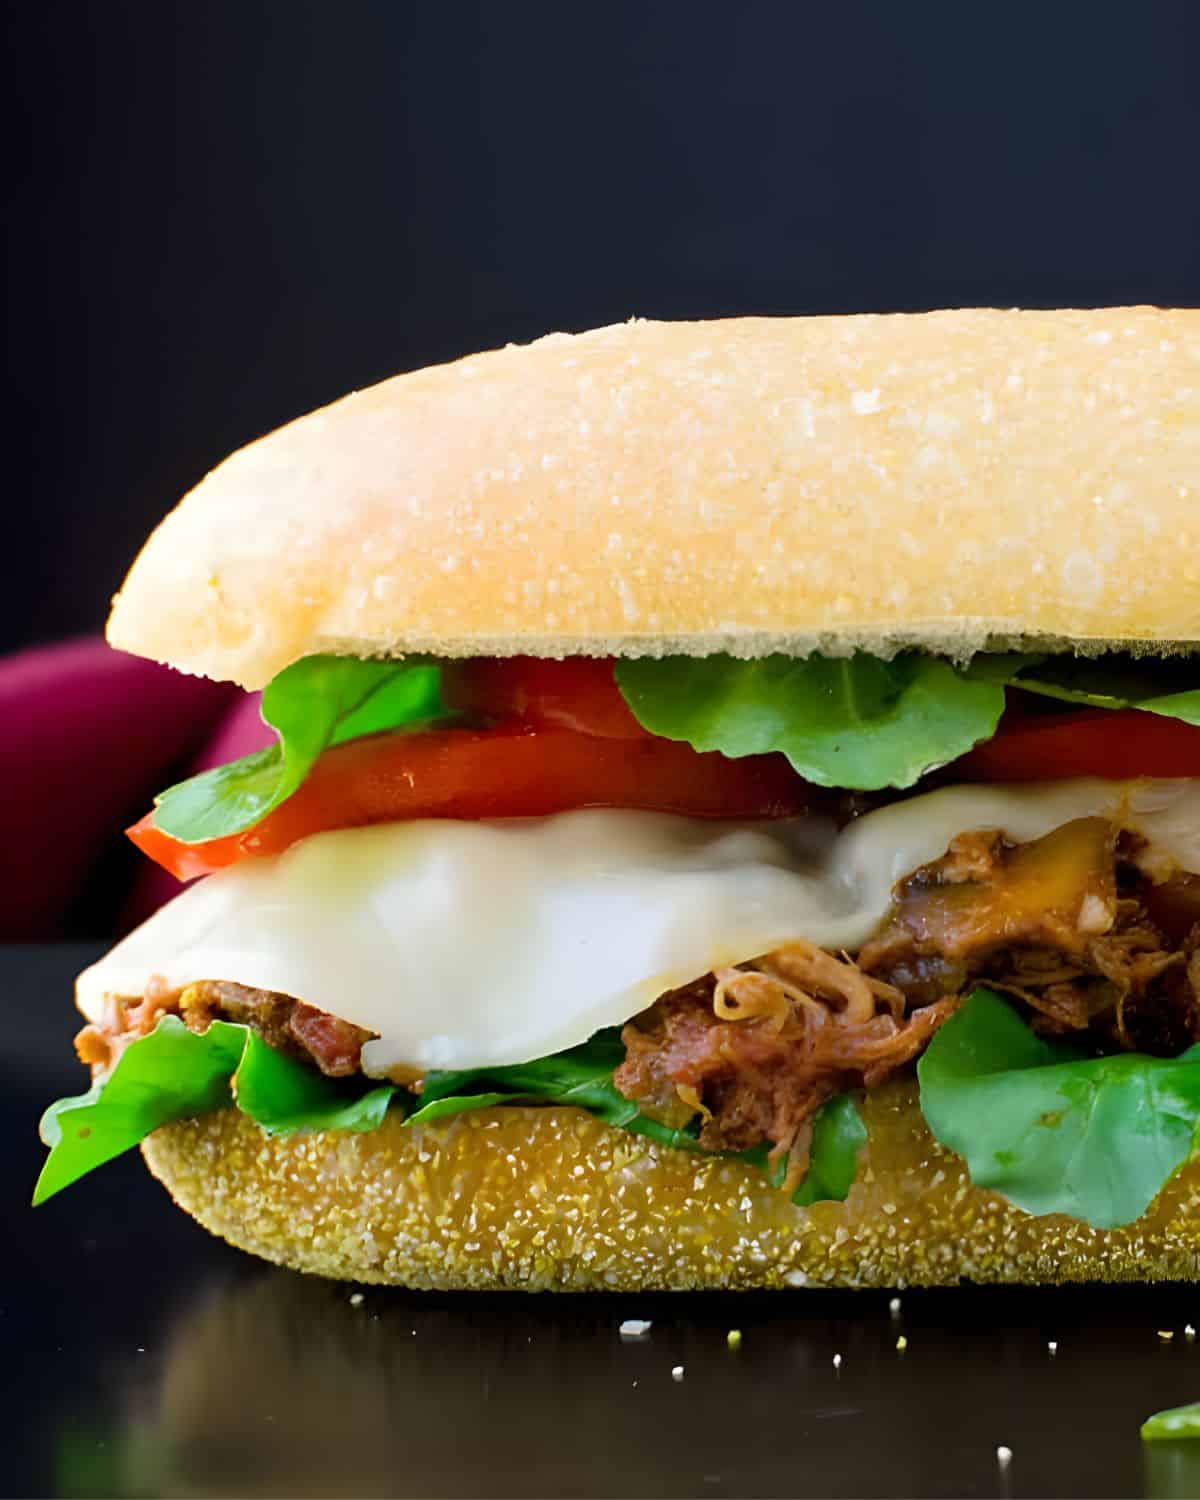 A braised pork sandwich with cheese and tomato.